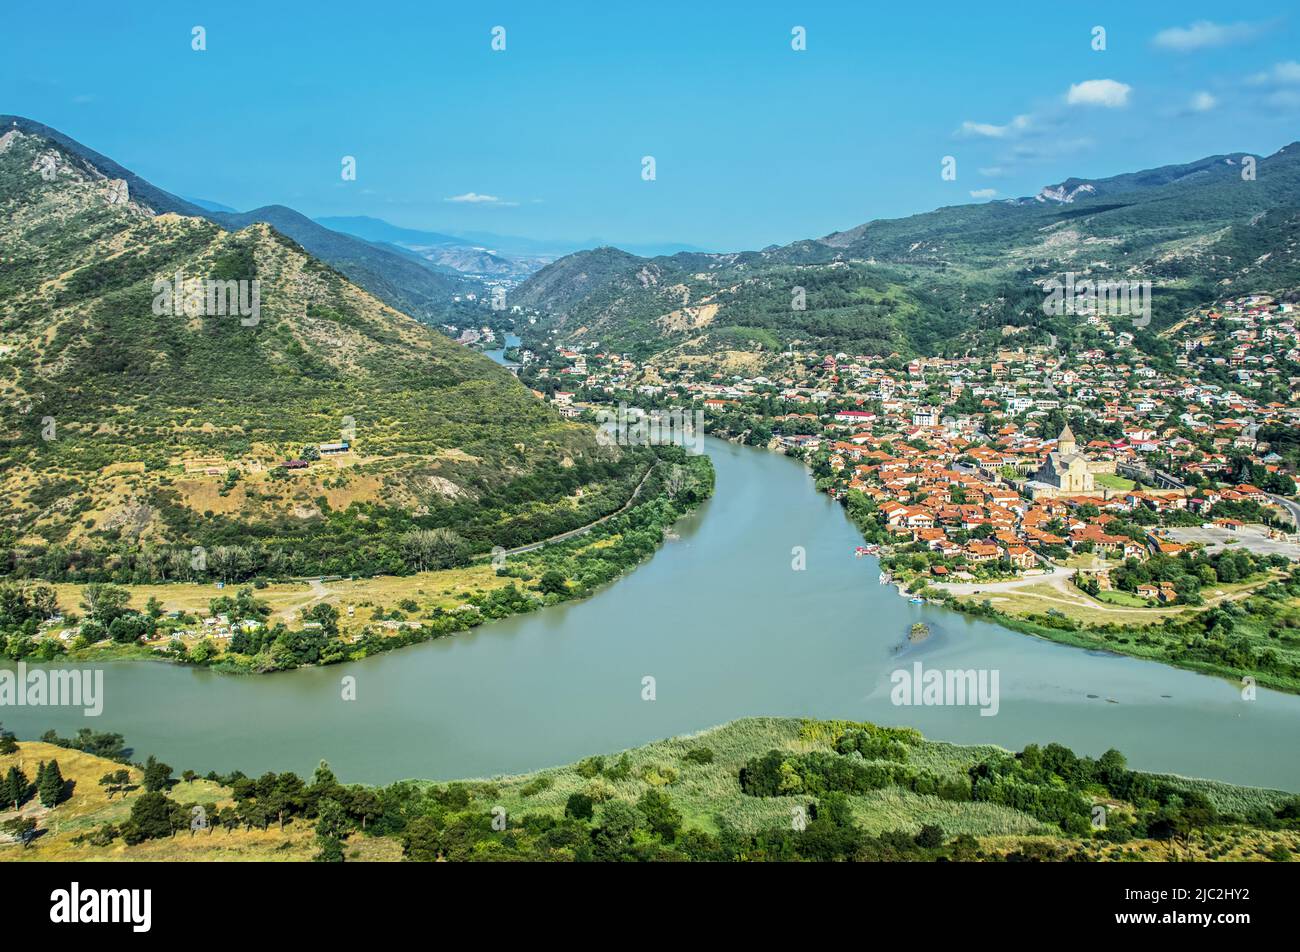 View from Jarvi Monastery down on Mtskheta - the old capital of Georgia - the River Kora converges with the River Araguae flowing down from the Caucas Stock Photo